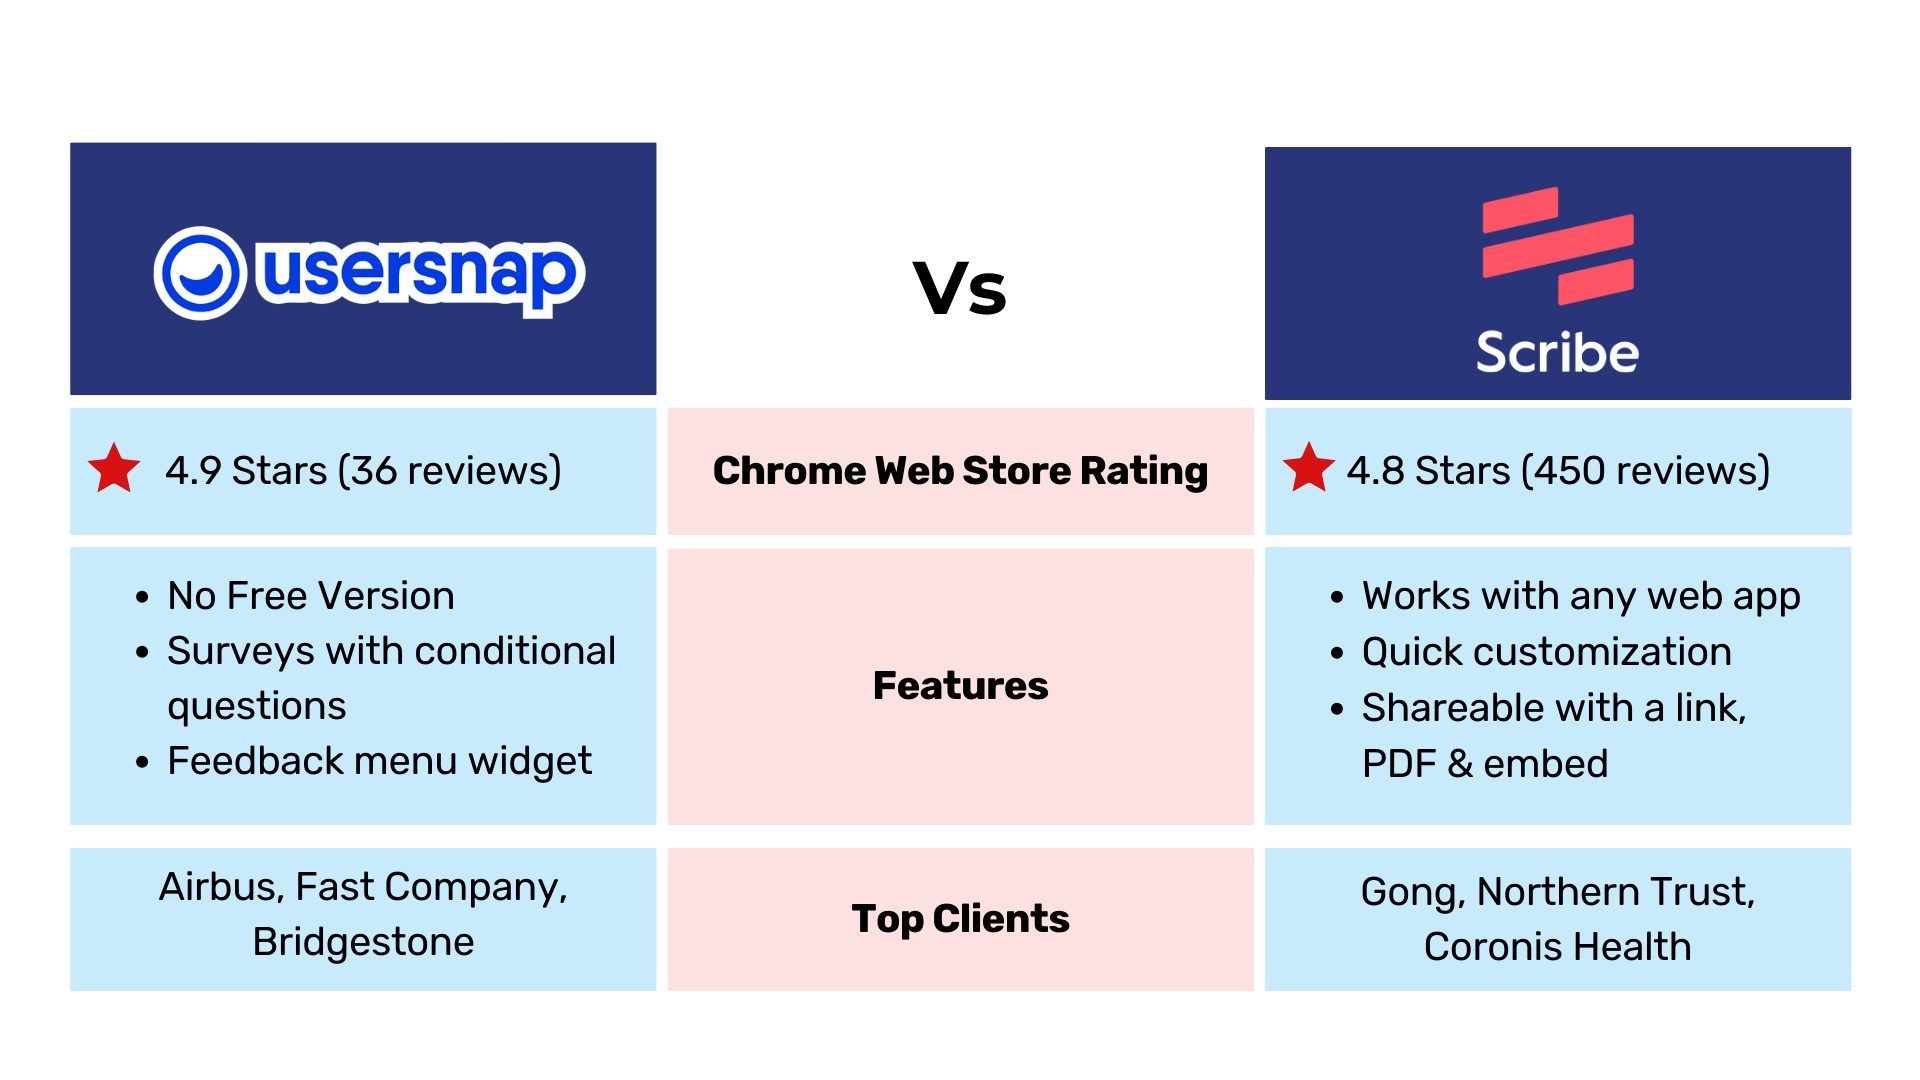 Usersnap Vs Scribe comparison table with rating, features, top clients